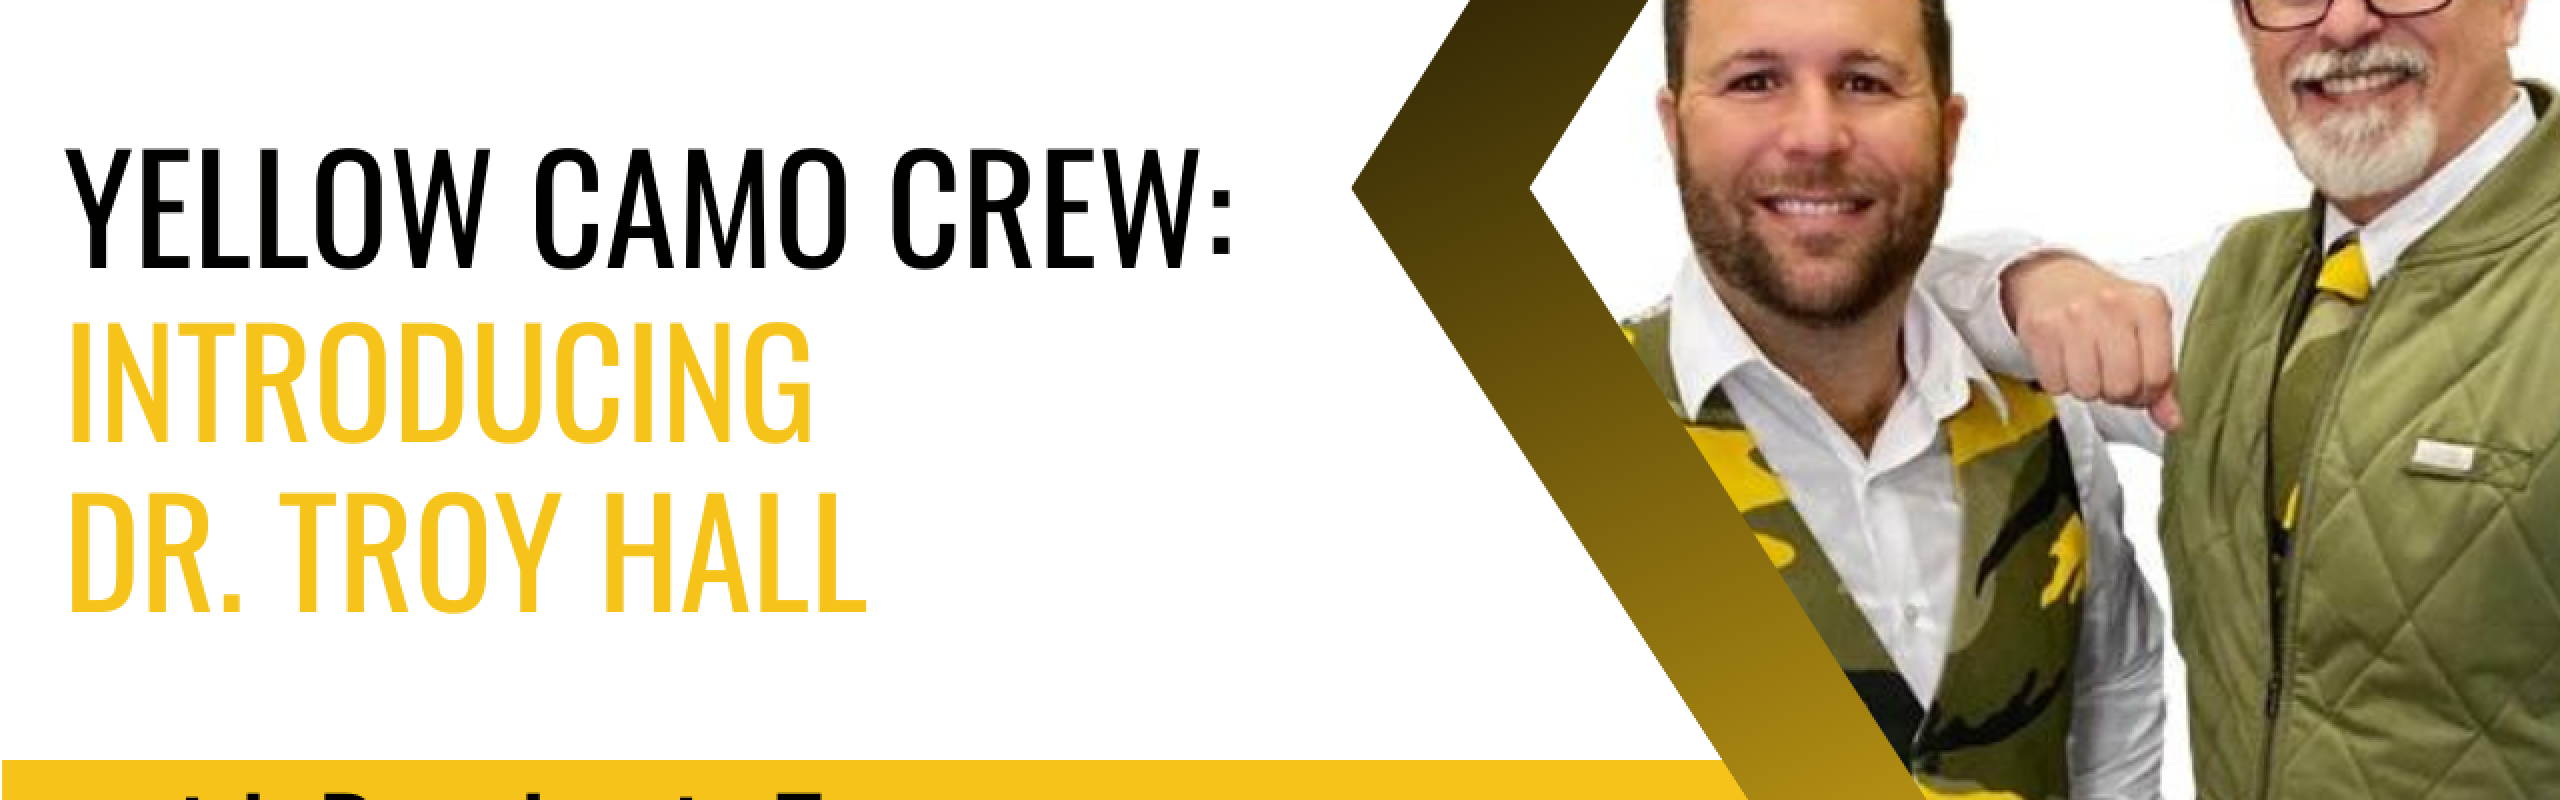 Yellow Camo Crew: Introducing Dr. Troy Hall